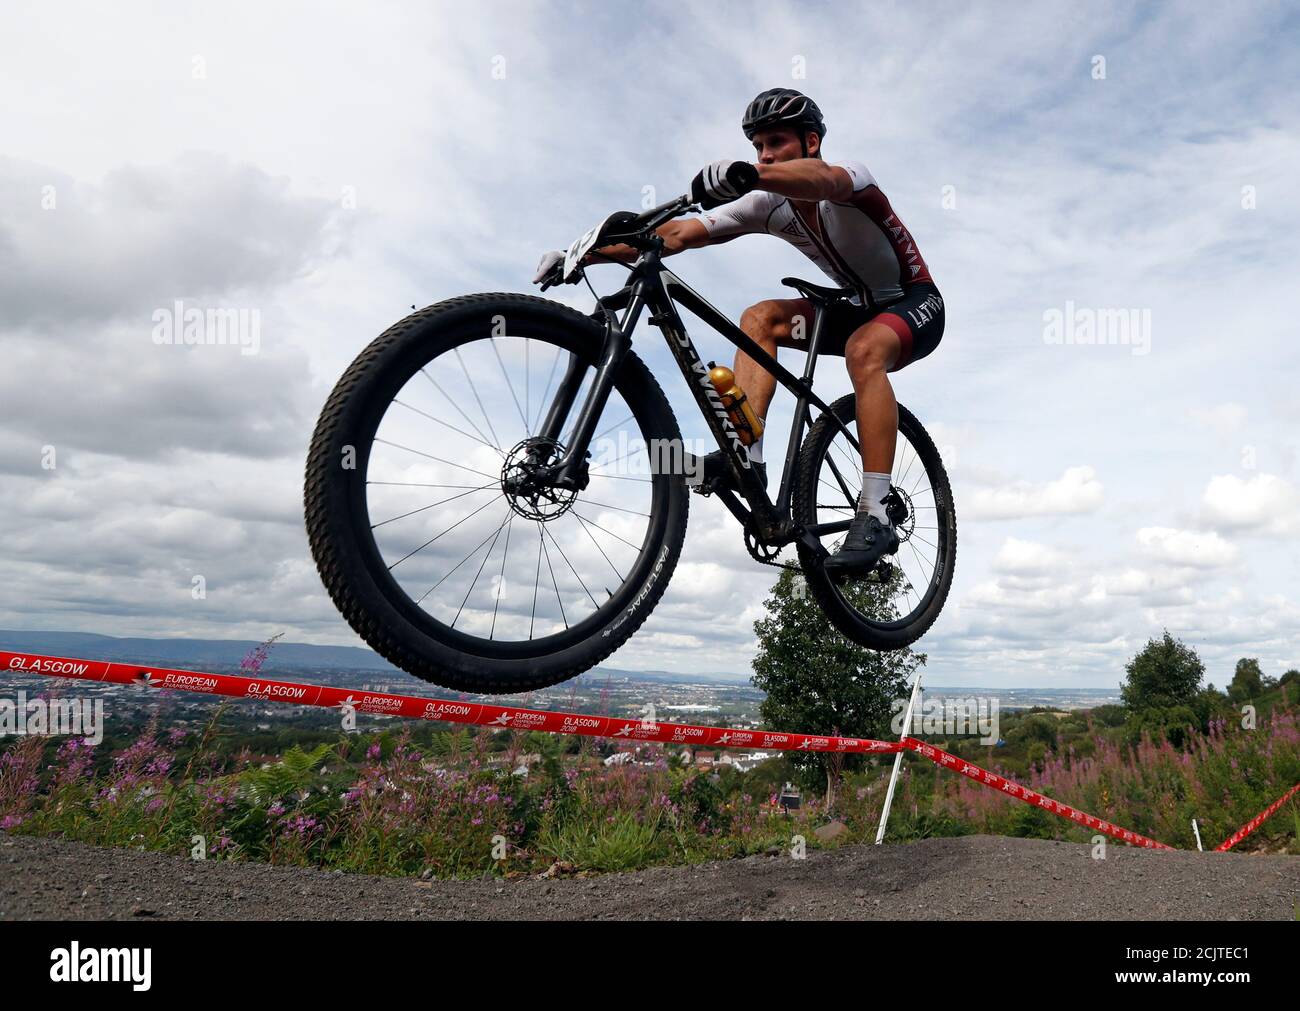 2018 European Championships - Mountain Bike, Men's Cross-Country - Cathkin  Braes Mountain Bike Trails, Glasgow, Britain - August 7, 2018 - Arnis  Petersons of Latvia in action. REUTERS/Russell Cheyne Stock Photo - Alamy